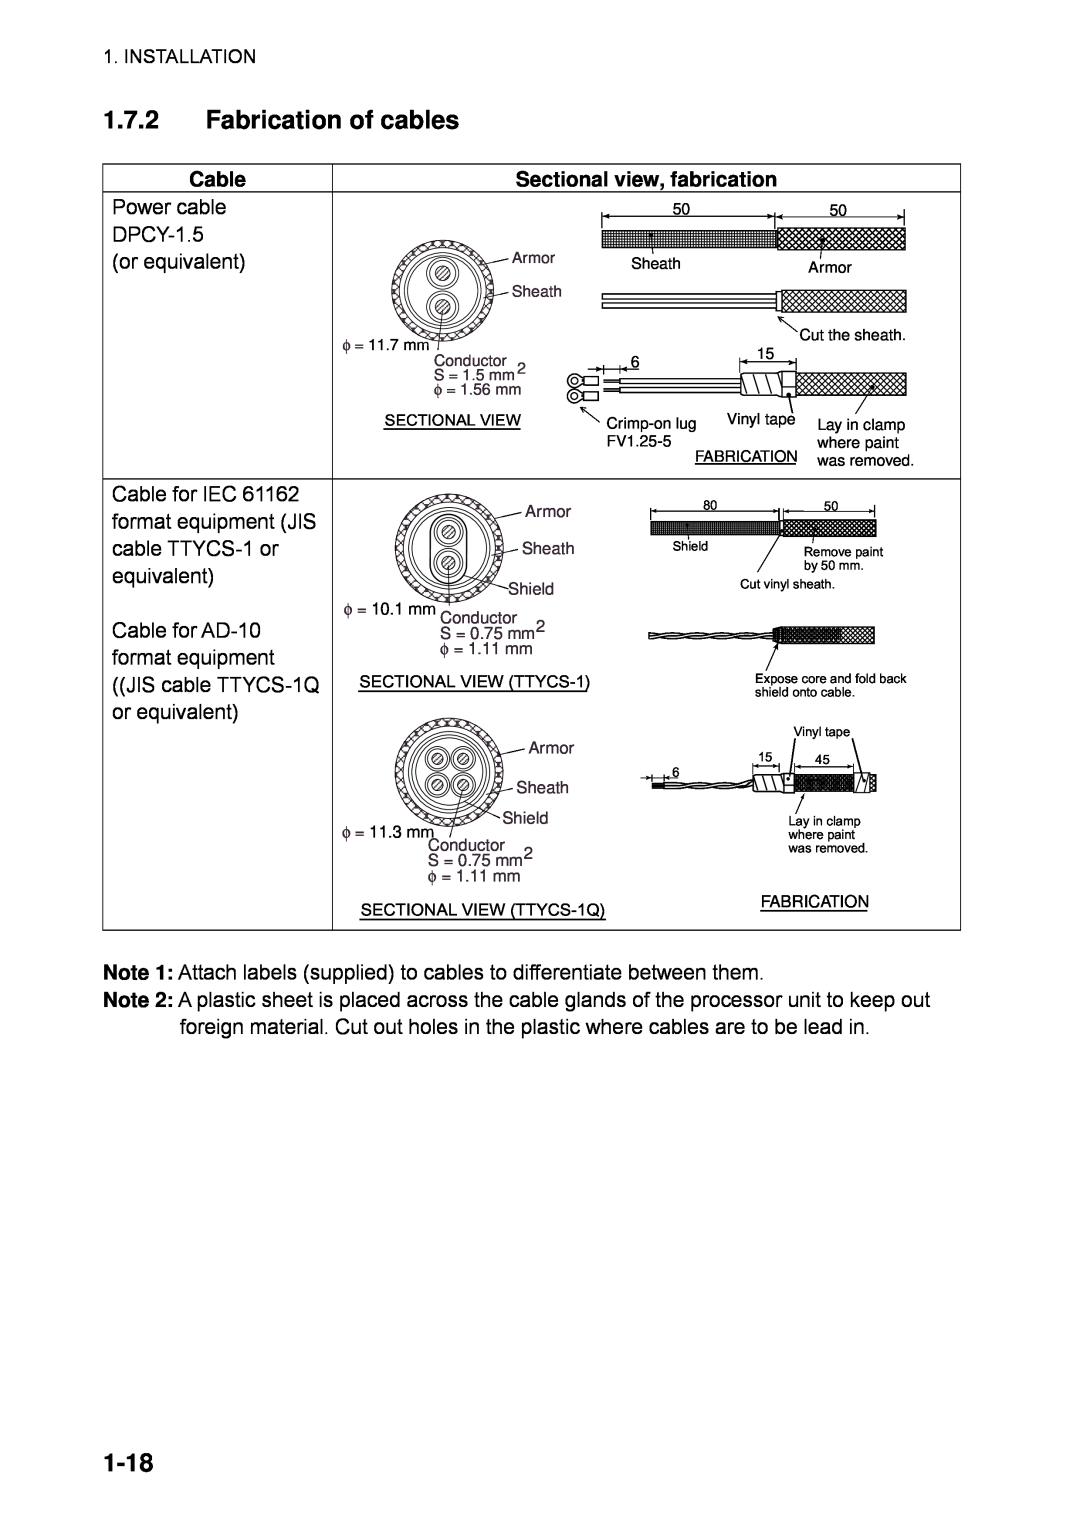 Furuno SC-110 manual 1.7.2Fabrication of cables, 1-18, Cable, Sectional view, fabrication 